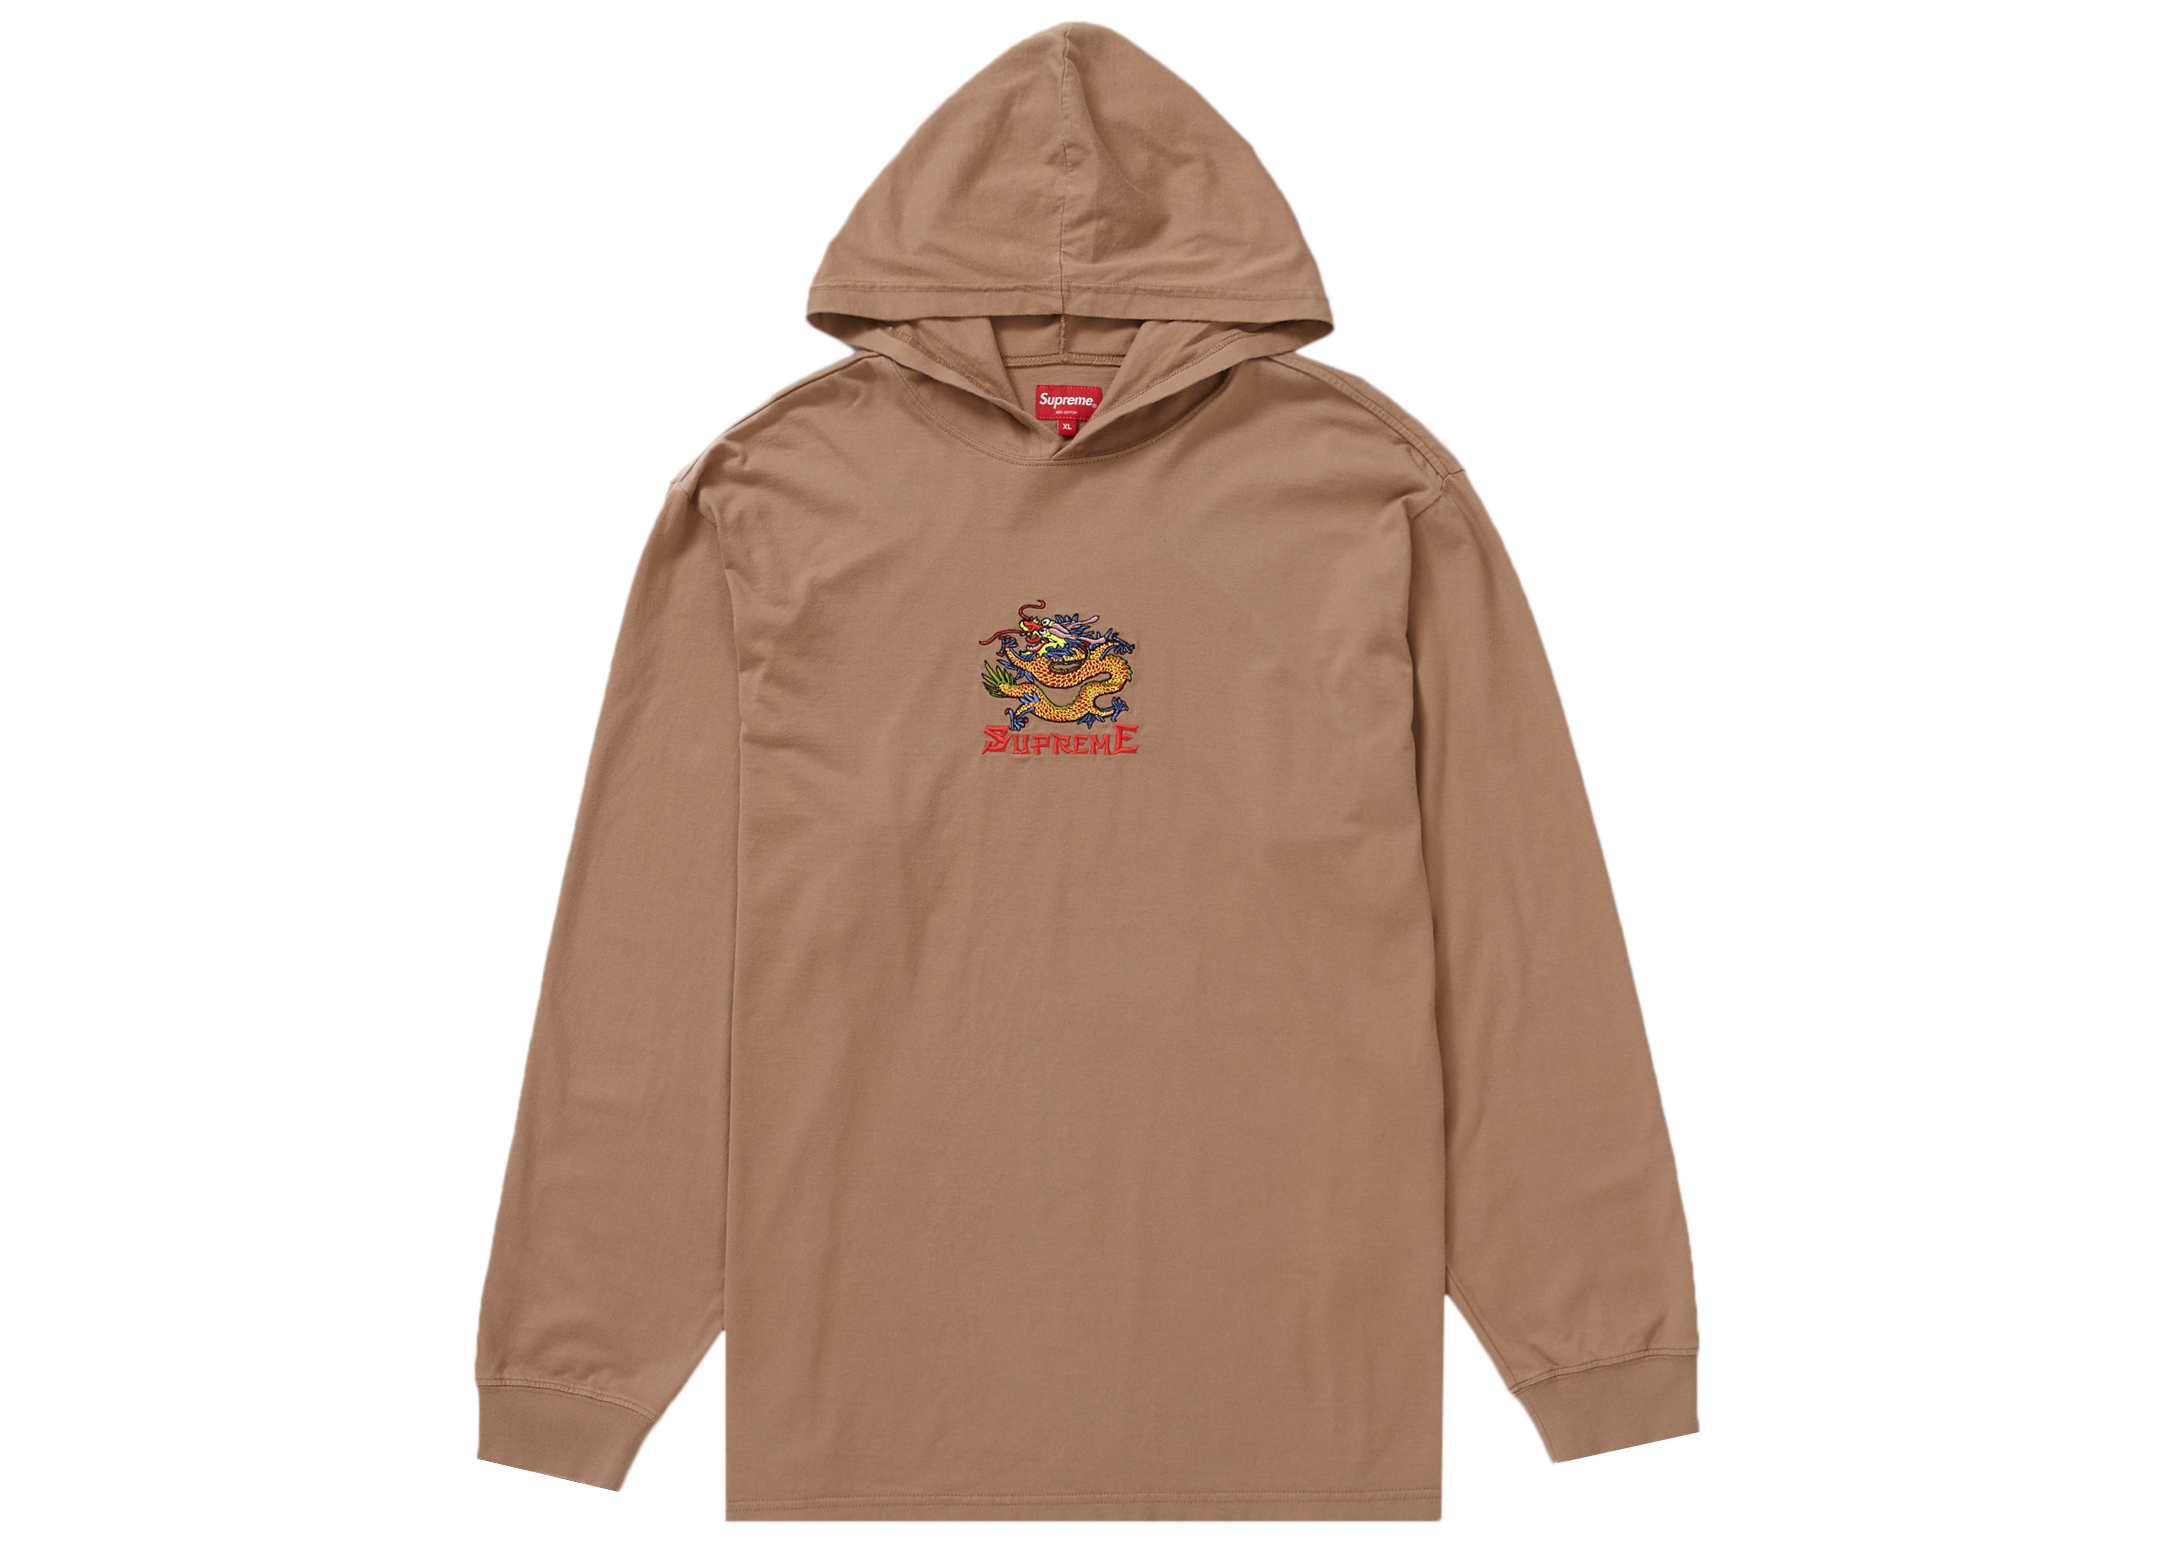 Sサイズ Supreme Lacoste Hooded Light Brown